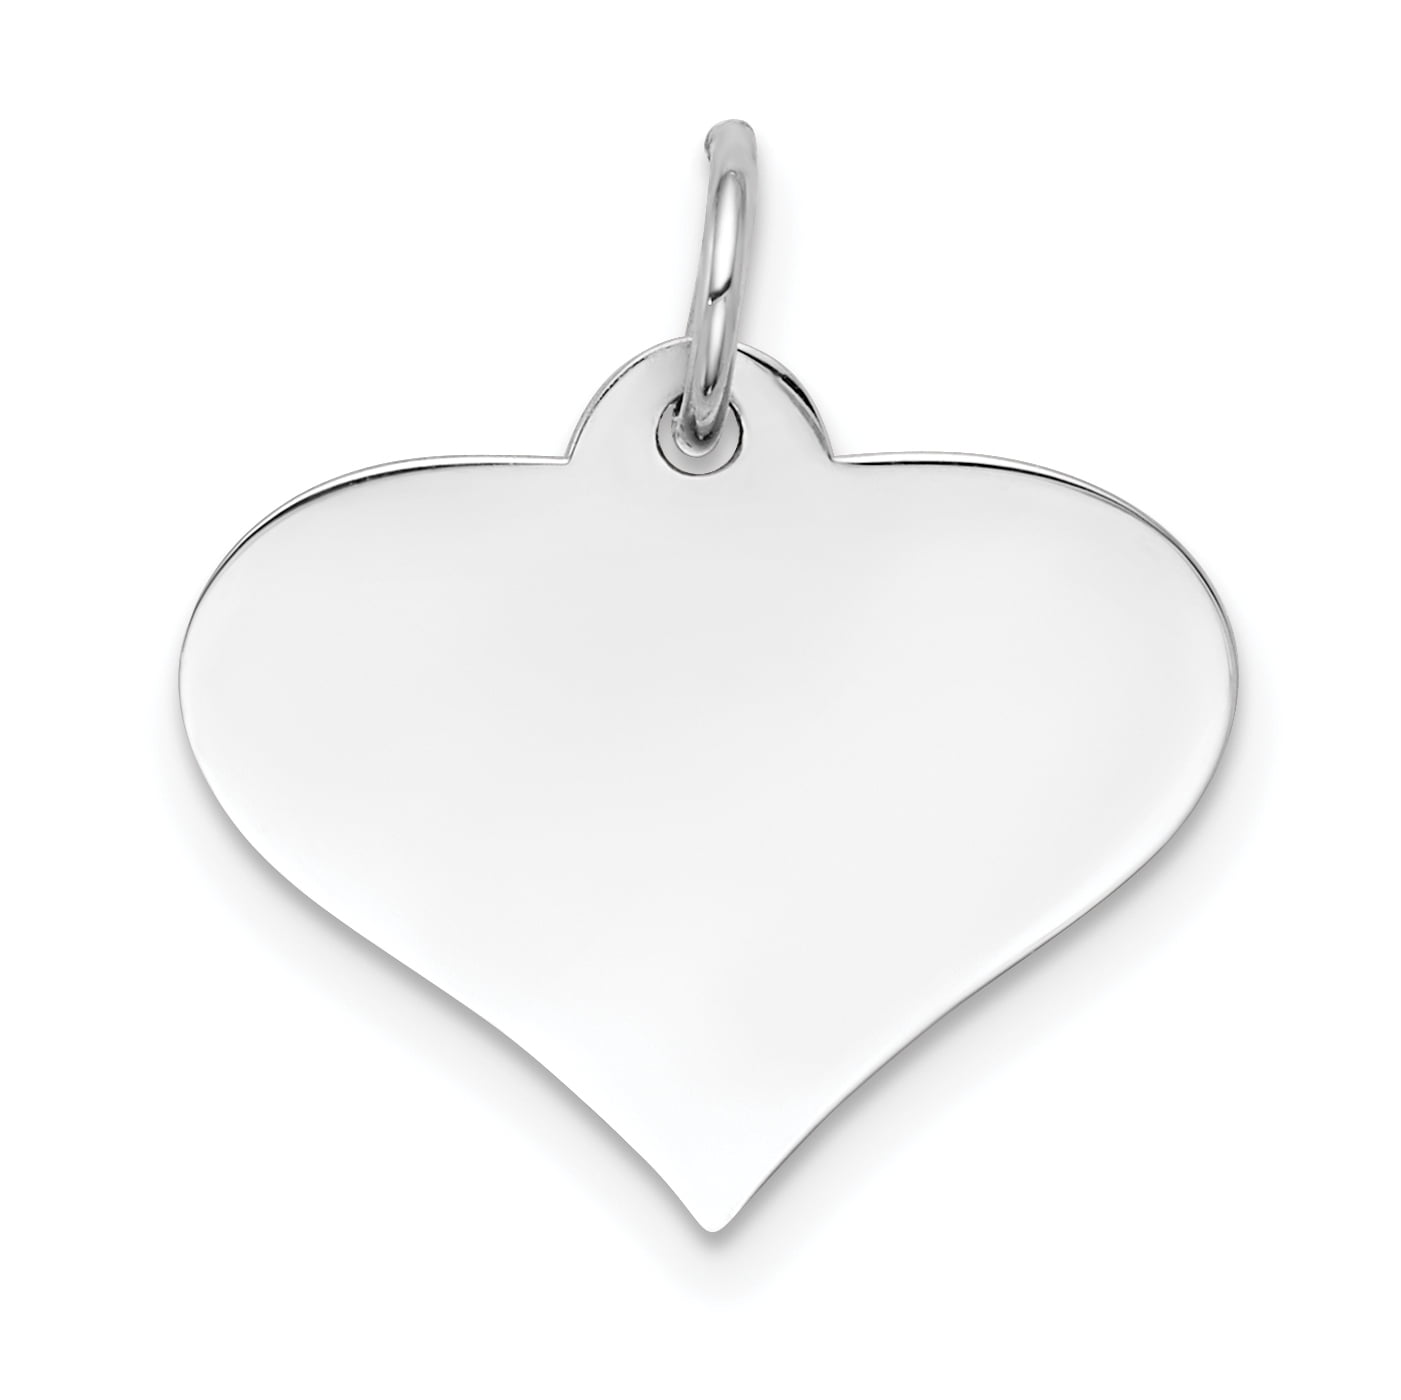 0.9IN long x 0.6IN wide 14k White Gold Etched Design 0.013 Gauge Engravable Heart Charm